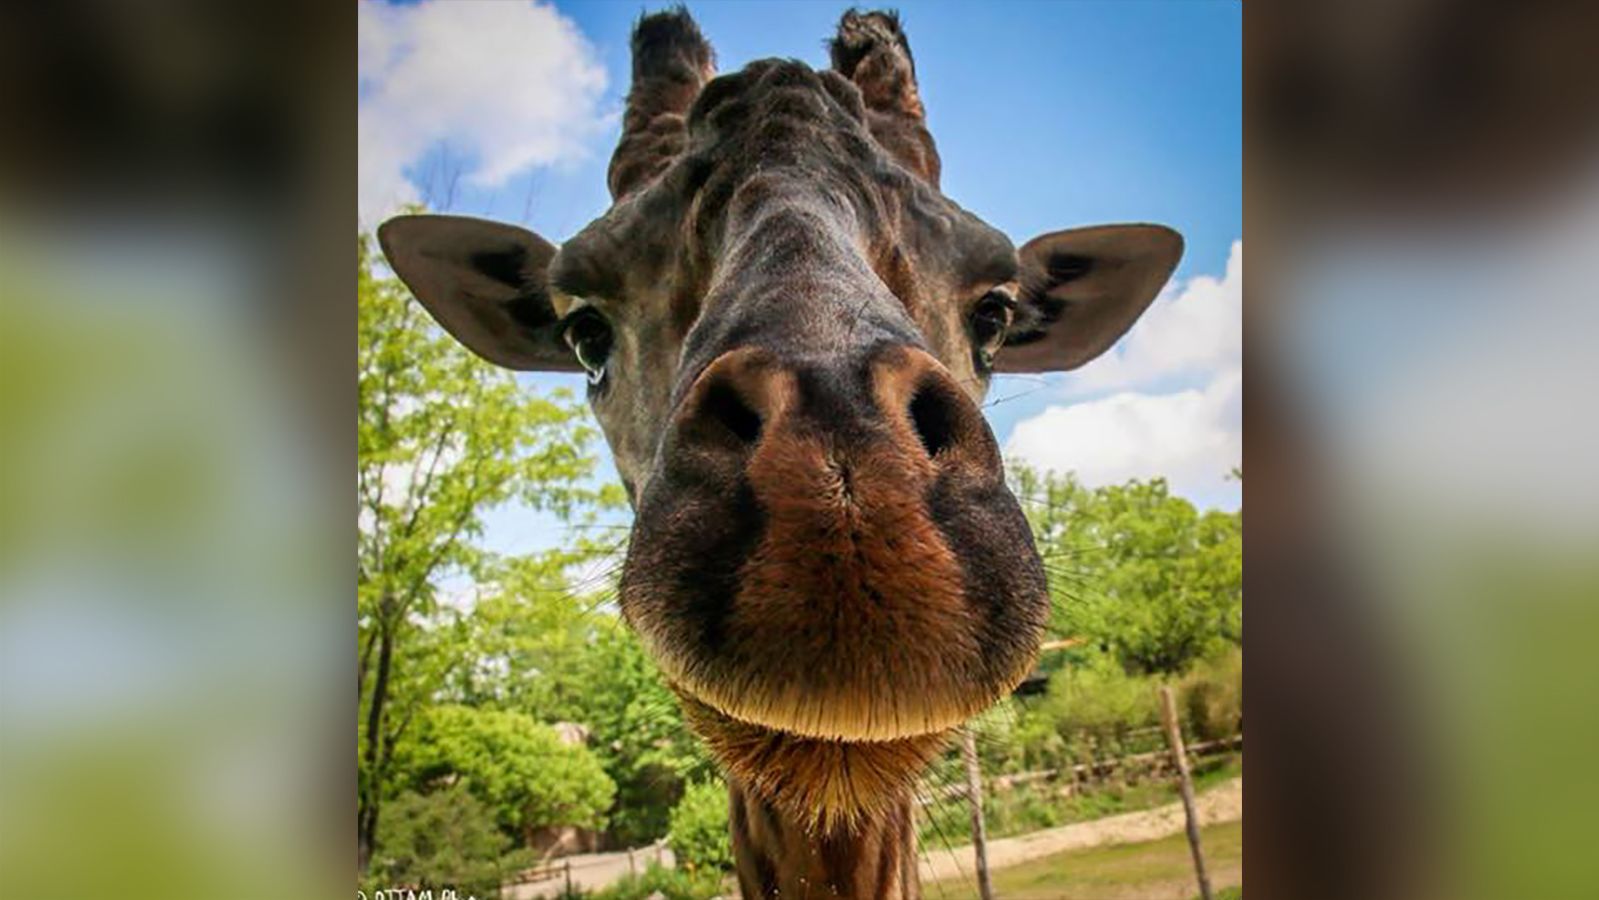 Kimba, the Cincinnati Zoo's only male giraffe, died Sunday after complications from hoof surgery.